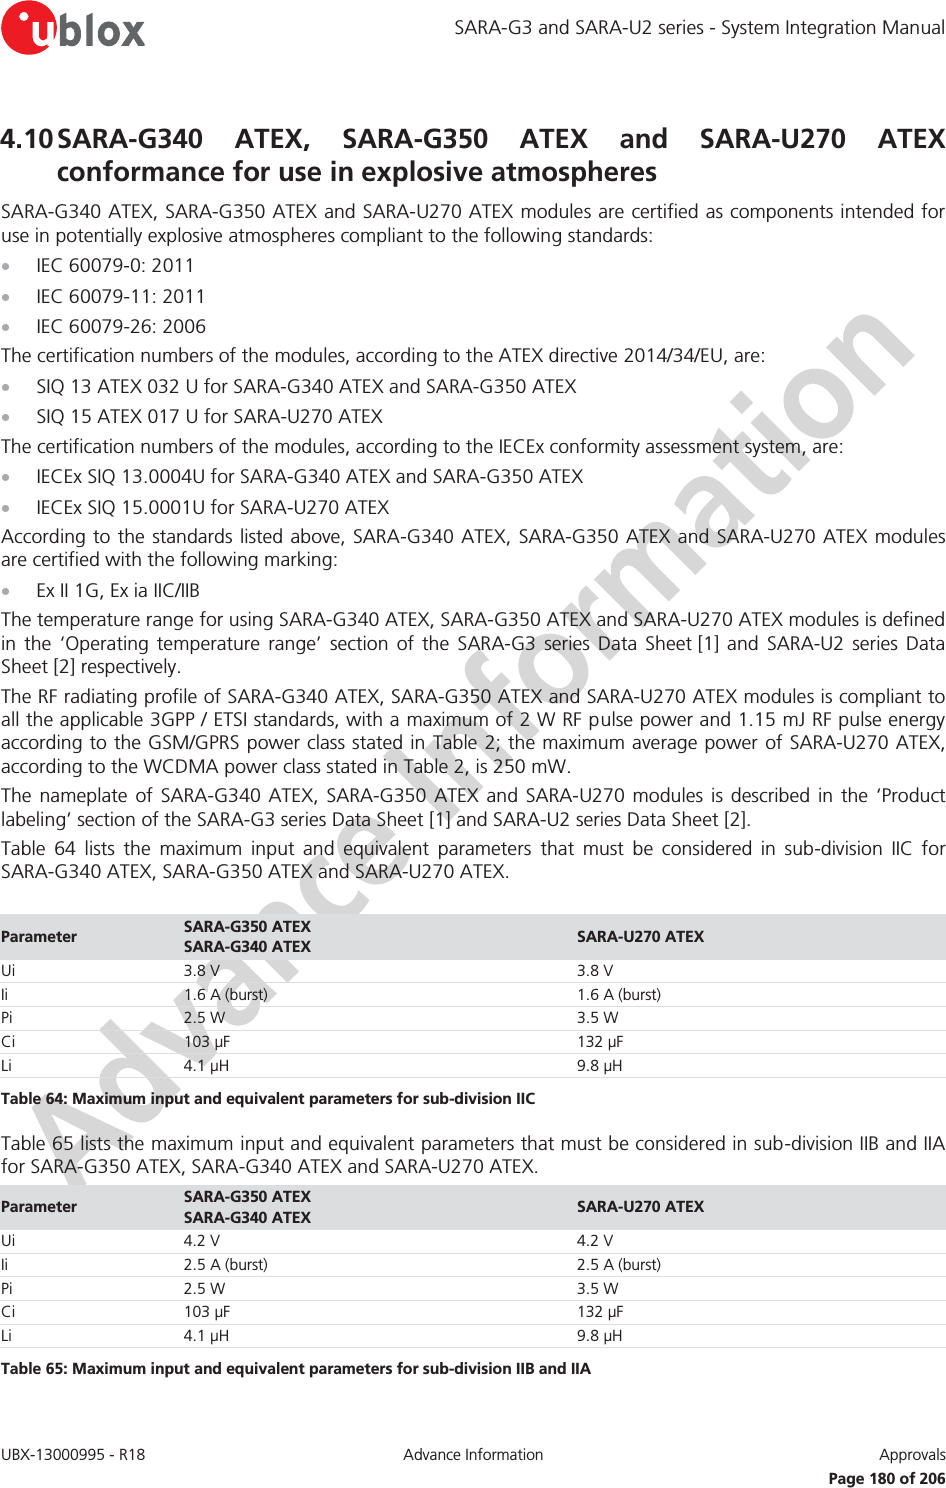 SARA-G3 and SARA-U2 series - System Integration Manual UBX-13000995 - R18  Advance Information  Approvals   Page 180 of 206 4.10 SARA-G340 ATEX, SARA-G350 ATEX and SARA-U270 ATEX conformance for use in explosive atmospheres SARA-G340 ATEX, SARA-G350 ATEX and SARA-U270 ATEX modules are certified as components intended for use in potentially explosive atmospheres compliant to the following standards: x IEC 60079-0: 2011 x IEC 60079-11: 2011 x IEC 60079-26: 2006 The certification numbers of the modules, according to the ATEX directive 2014/34/EU, are: x SIQ 13 ATEX 032 U for SARA-G340 ATEX and SARA-G350 ATEX x SIQ 15 ATEX 017 U for SARA-U270 ATEX The certification numbers of the modules, according to the IECEx conformity assessment system, are: x IECEx SIQ 13.0004U for SARA-G340 ATEX and SARA-G350 ATEX x IECEx SIQ 15.0001U for SARA-U270 ATEX According to the standards listed above, SARA-G340 ATEX, SARA-G350 ATEX and SARA-U270 ATEX modules are certified with the following marking: x Ex II 1G, Ex ia IIC/IIB The temperature range for using SARA-G340 ATEX, SARA-G350 ATEX and SARA-U270 ATEX modules is defined in the ‘Operating temperature range’ section of the SARA-G3 series Data Sheet [1]  and  SARA-U2 series Data Sheet [2] respectively.  The RF radiating profile of SARA-G340 ATEX, SARA-G350 ATEX and SARA-U270 ATEX modules is compliant to all the applicable 3GPP / ETSI standards, with a maximum of 2 W RF pulse power and 1.15 mJ RF pulse energy according to the GSM/GPRS power class stated in Table 2; the maximum average power of SARA-U270 ATEX, according to the WCDMA power class stated in Table 2, is 250 mW. The nameplate of SARA-G340 ATEX, SARA-G350 ATEX and SARA-U270 modules is described in the ‘Product labeling’ section of the SARA-G3 series Data Sheet [1] and SARA-U2 series Data Sheet [2]. Table 64 lists the maximum input and equivalent parameters that must be considered in sub-division IIC for SARA-G340 ATEX, SARA-G350 ATEX and SARA-U270 ATEX.  Parameter SARA-G350 ATEX SARA-G340 ATEX SARA-U270 ATEX Ui 3.8 V 3.8 V Ii 1.6 A (burst) 1.6 A (burst) Pi 2.5 W 3.5 W Ci 103 μF 132 μF Li 4.1 μH 9.8 μH Table 64: Maximum input and equivalent parameters for sub-division IIC Table 65 lists the maximum input and equivalent parameters that must be considered in sub-division IIB and IIA for SARA-G350 ATEX, SARA-G340 ATEX and SARA-U270 ATEX. Parameter SARA-G350 ATEX SARA-G340 ATEX SARA-U270 ATEX Ui 4.2 V 4.2 V Ii 2.5 A (burst) 2.5 A (burst) Pi 2.5 W 3.5 W Ci 103 μF 132 μF Li 4.1 μH 9.8 μH Table 65: Maximum input and equivalent parameters for sub-division IIB and IIA  